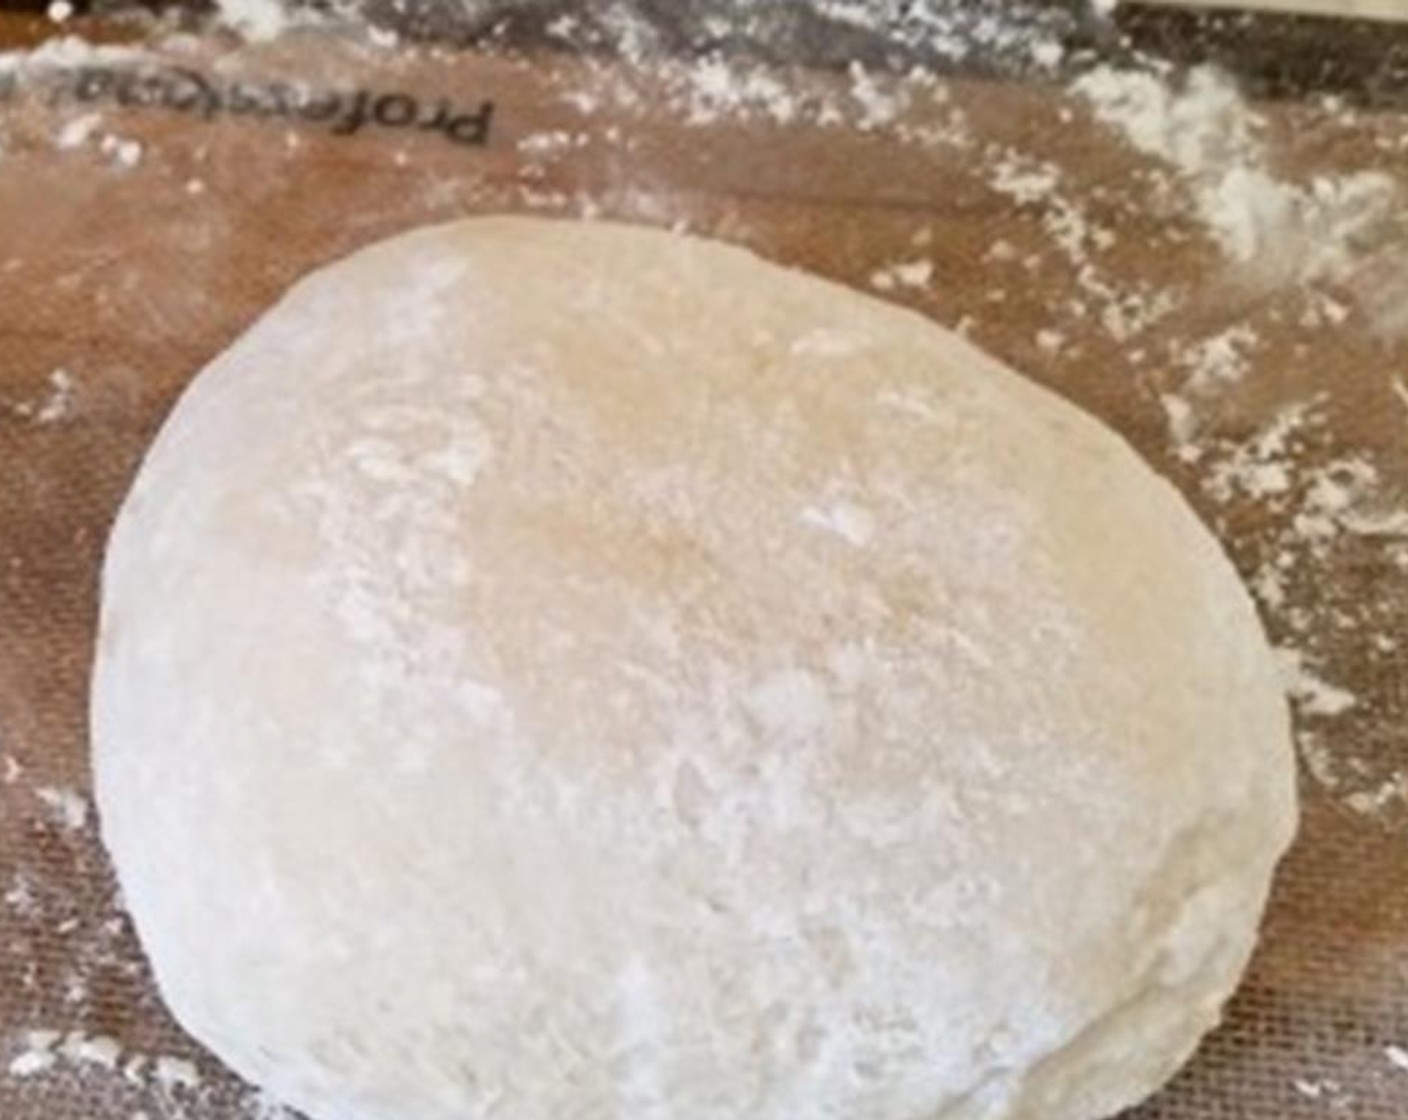 step 3 Turn dough out onto floured surface and knead for 3-5 minutes, until dough is smooth and elastic.